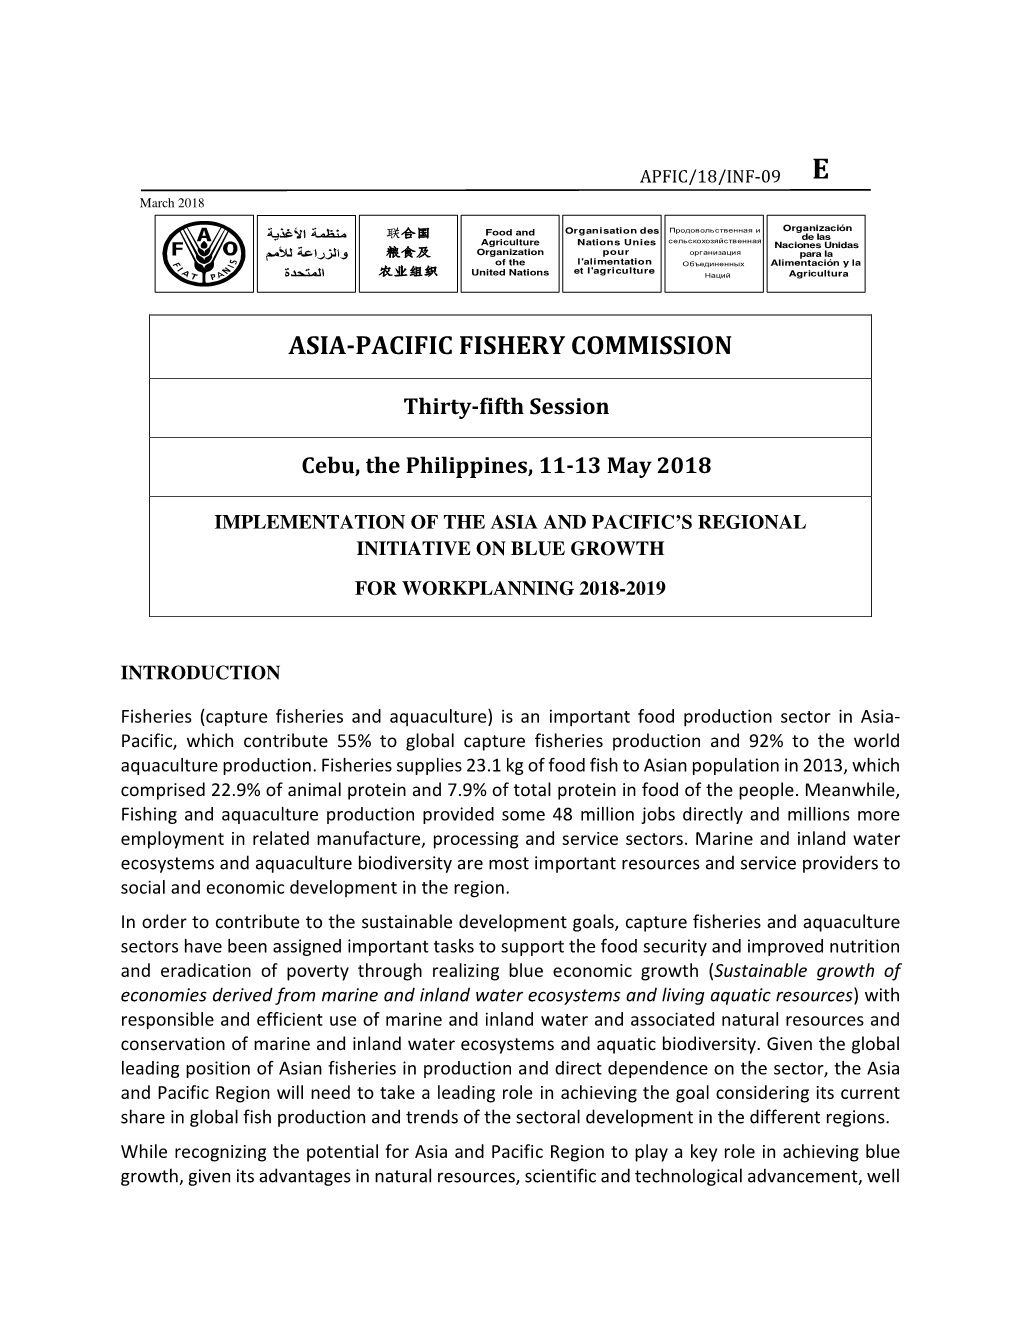 Asia-Pacific Fishery Commission